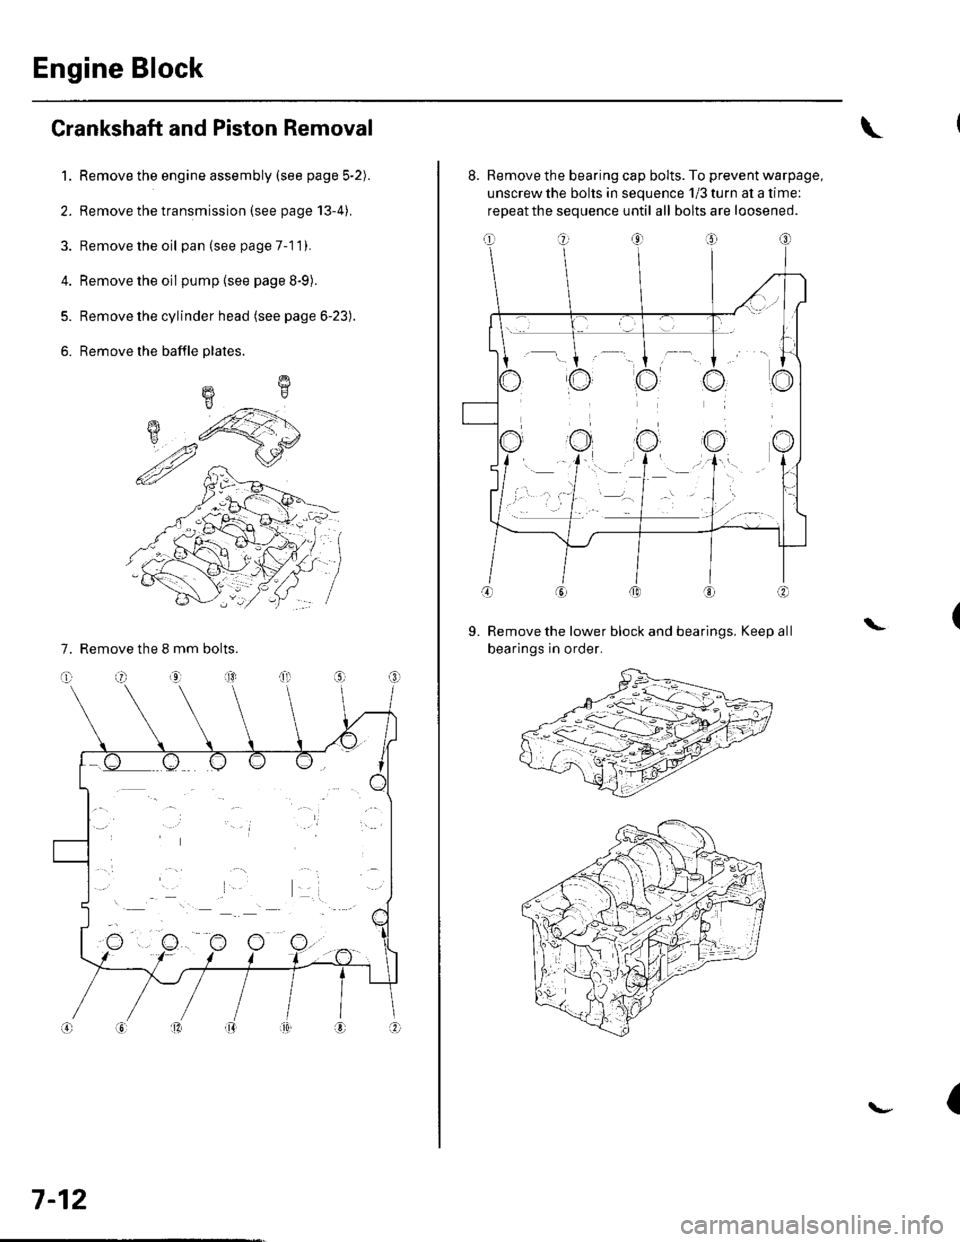 HONDA CIVIC 2003 7.G Workshop Manual Engine Block
Crankshaft and Piston Removal
1. Remove the engine assembly (see page 5-2).
2. Remove the transmission (see page 13-4).
3. Remove the oil pan (see page 7-1 1).
4. Remove the oil pump {see